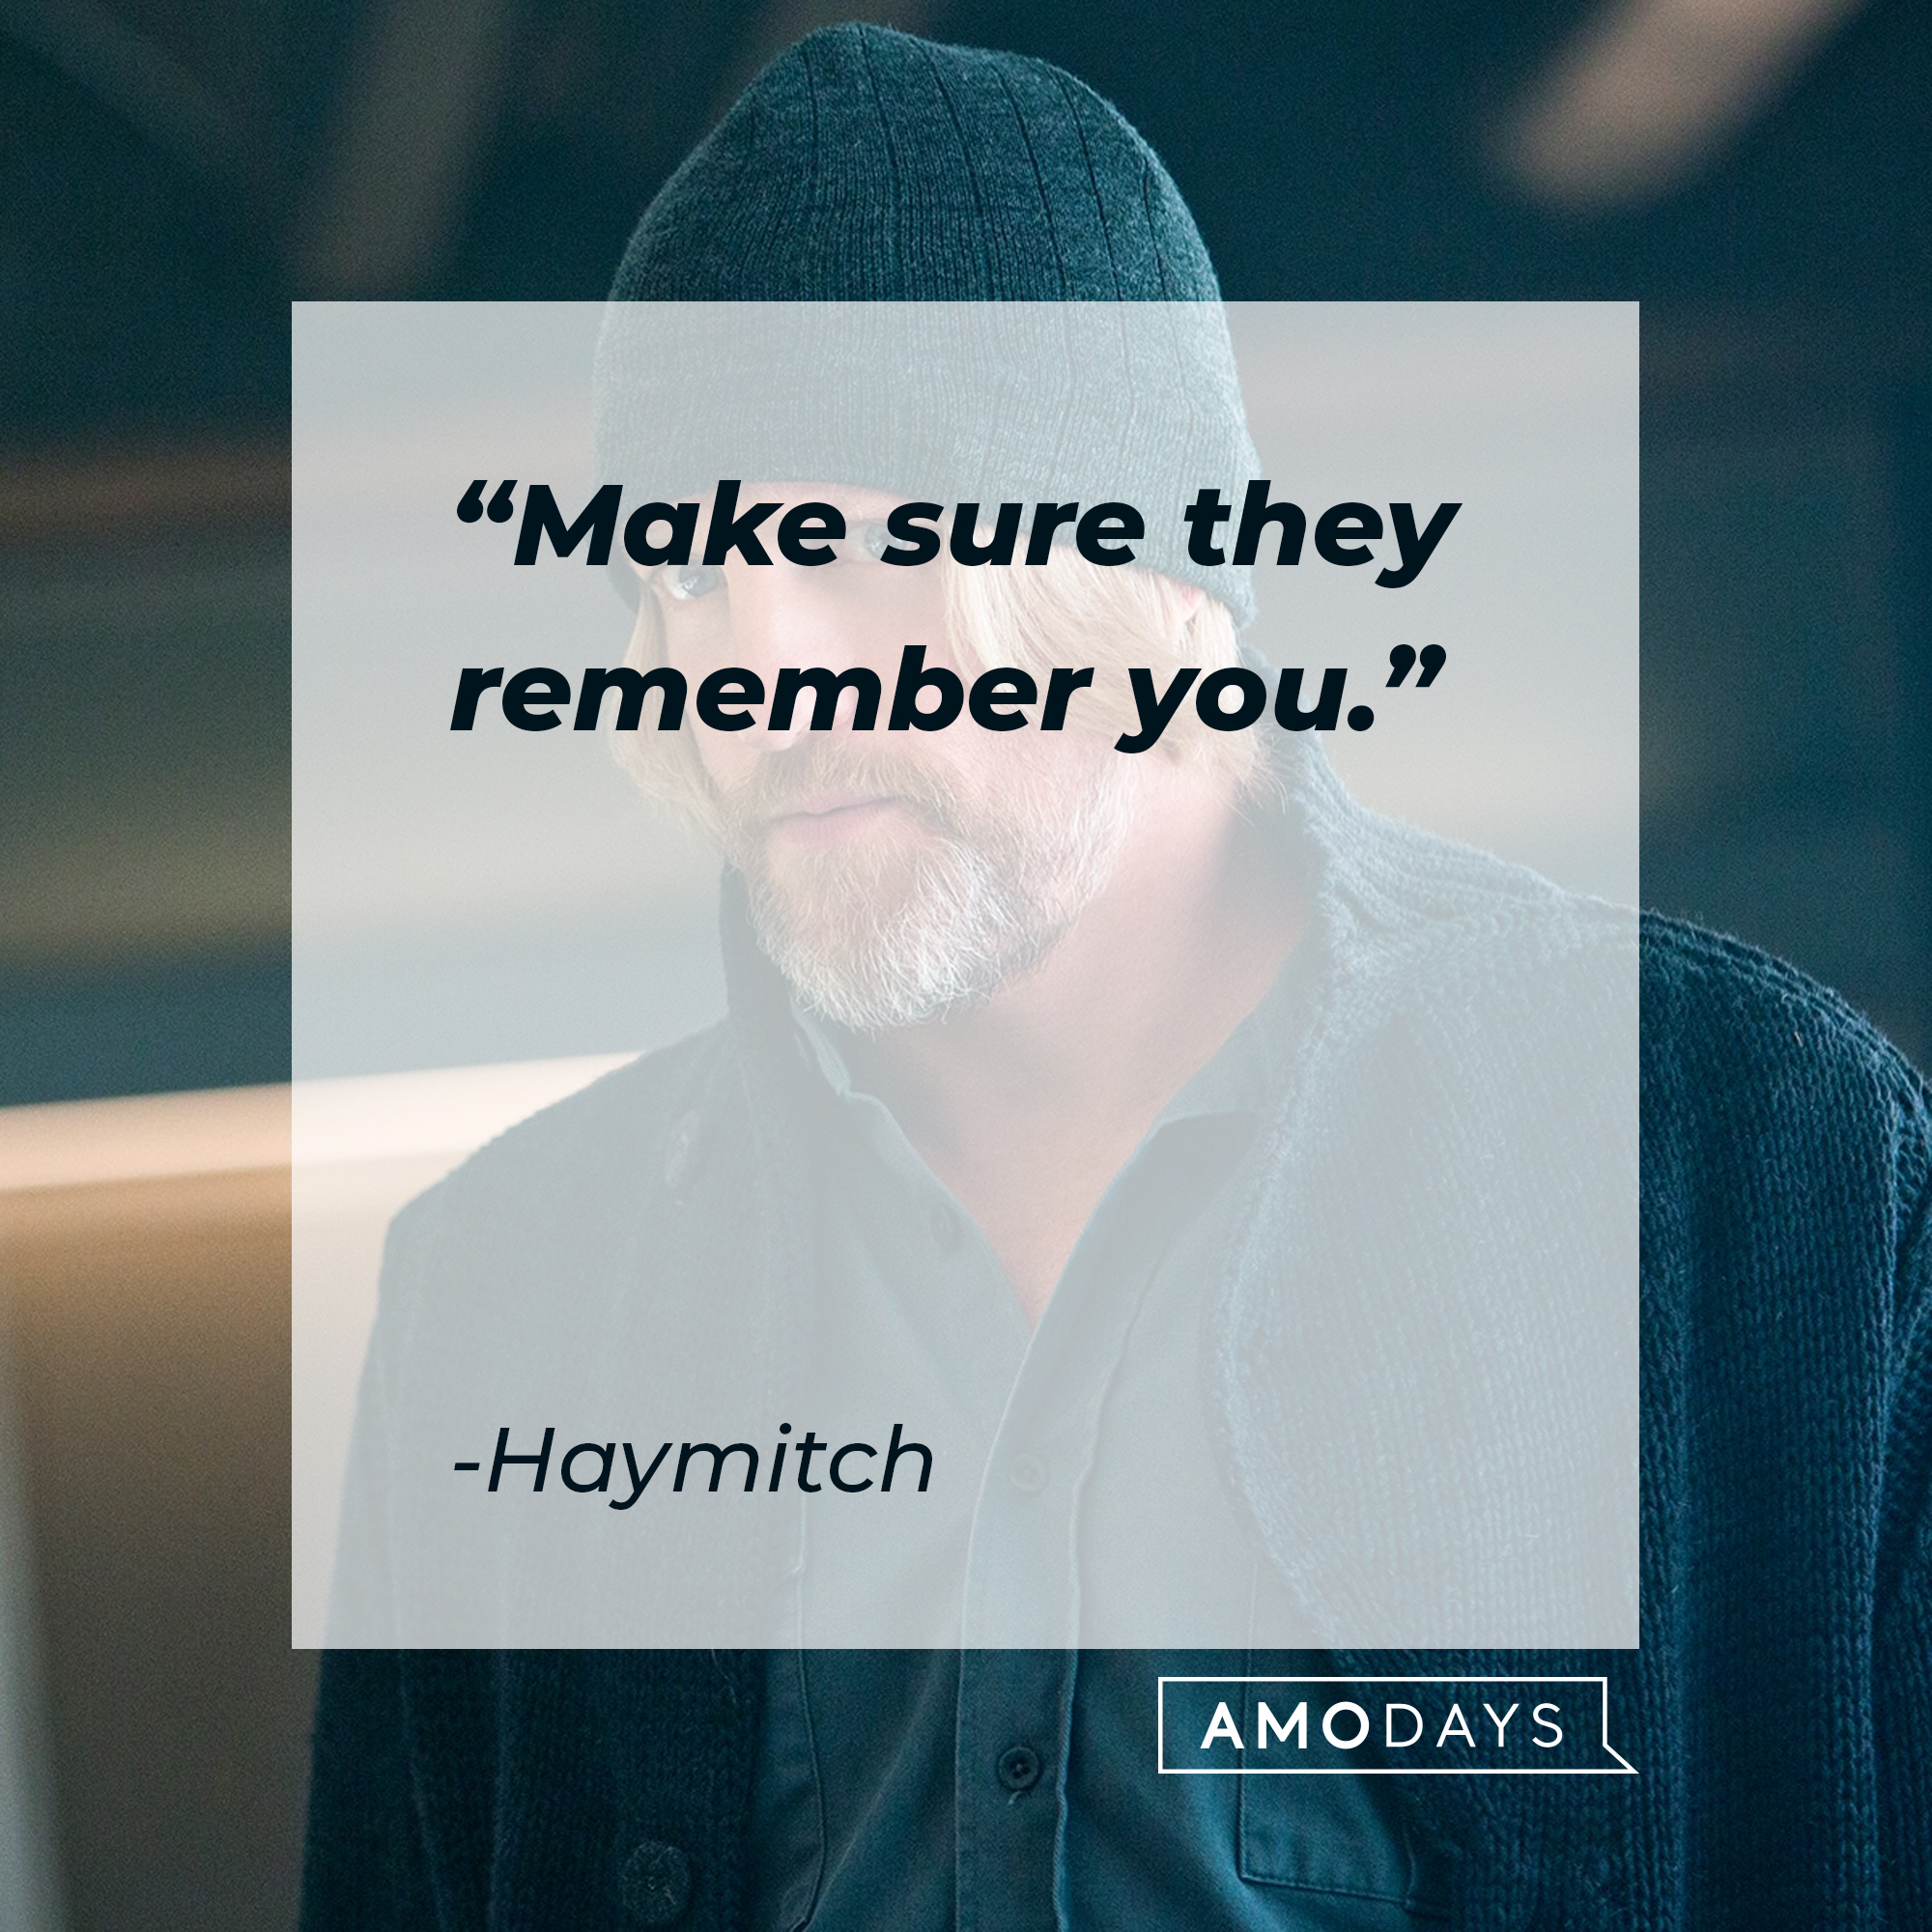 Haymitch's quote: "Make sure they remember you." | Source: facebook.com/TheHungerGamesMovie